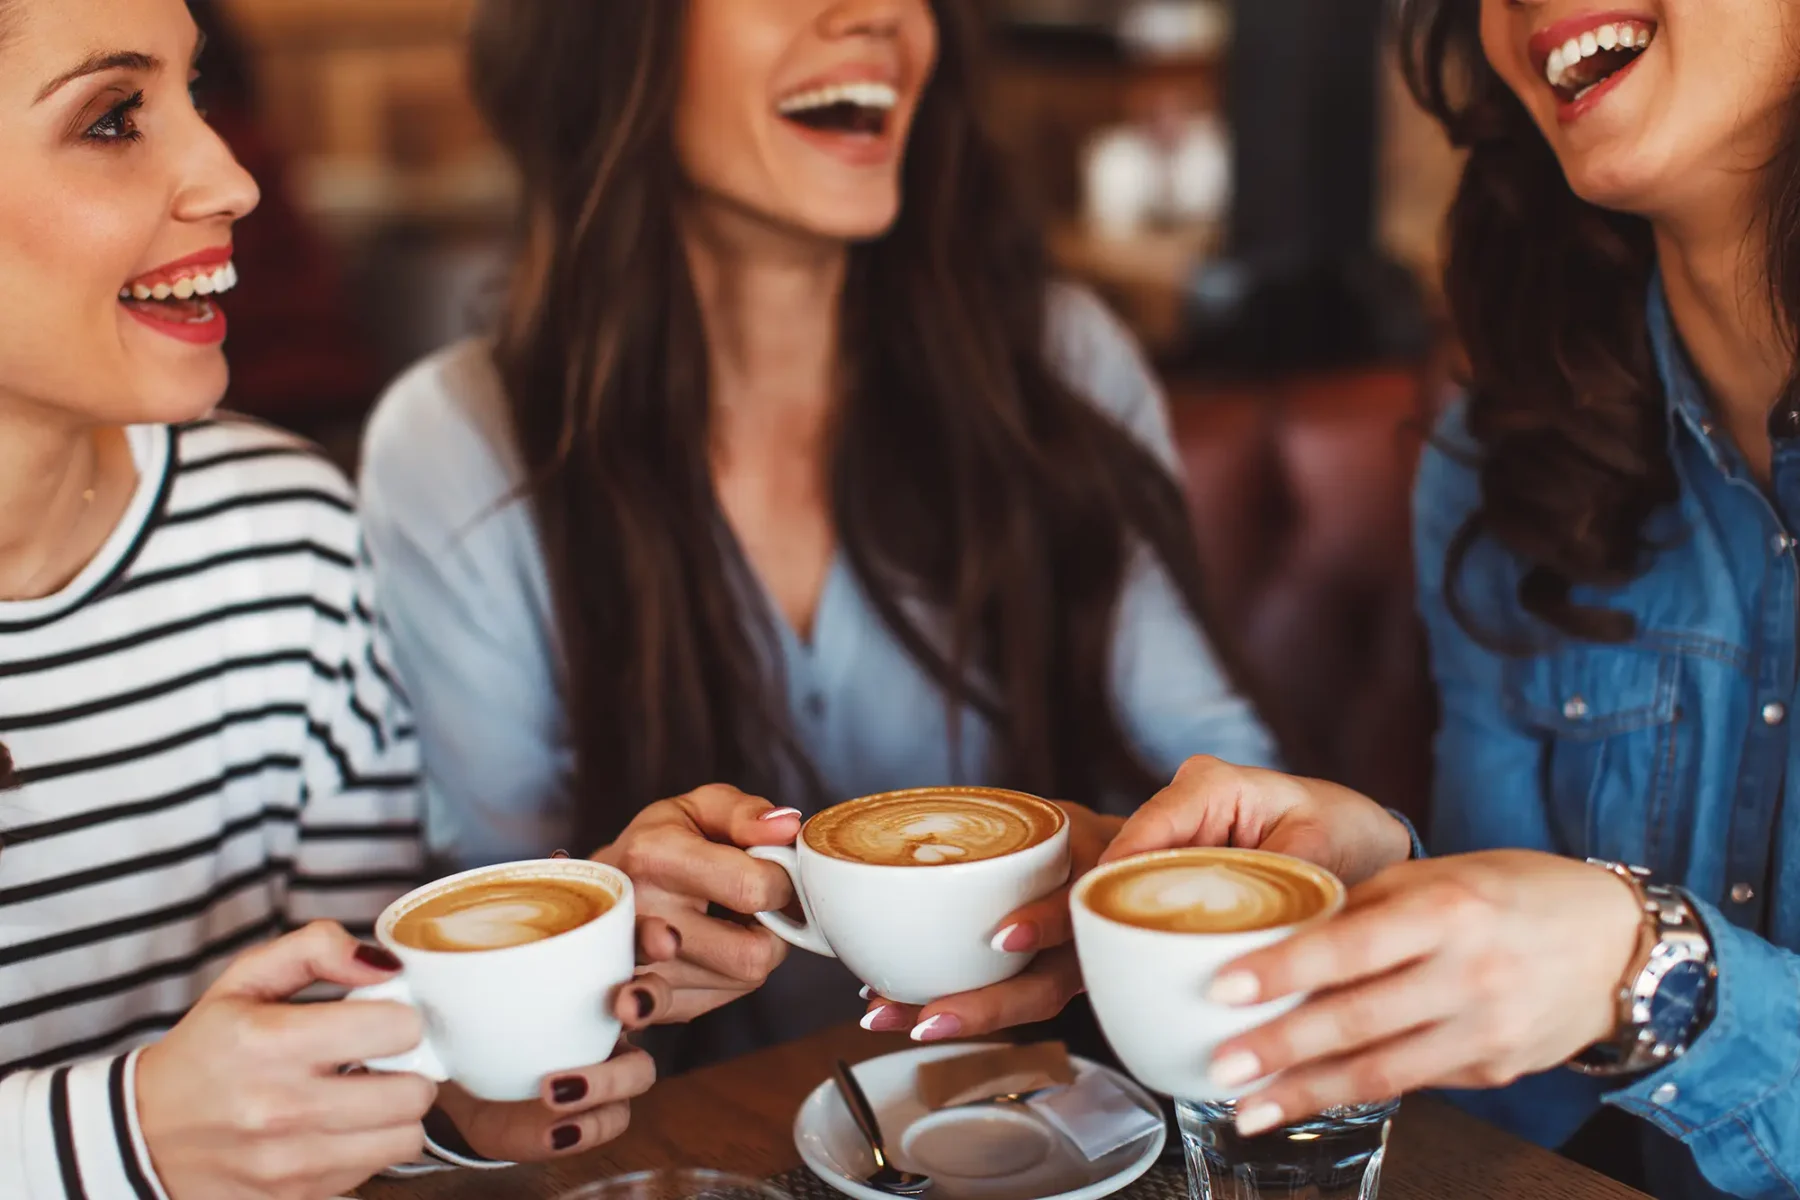 Women laughing in a cafe sitting at a table with coffee